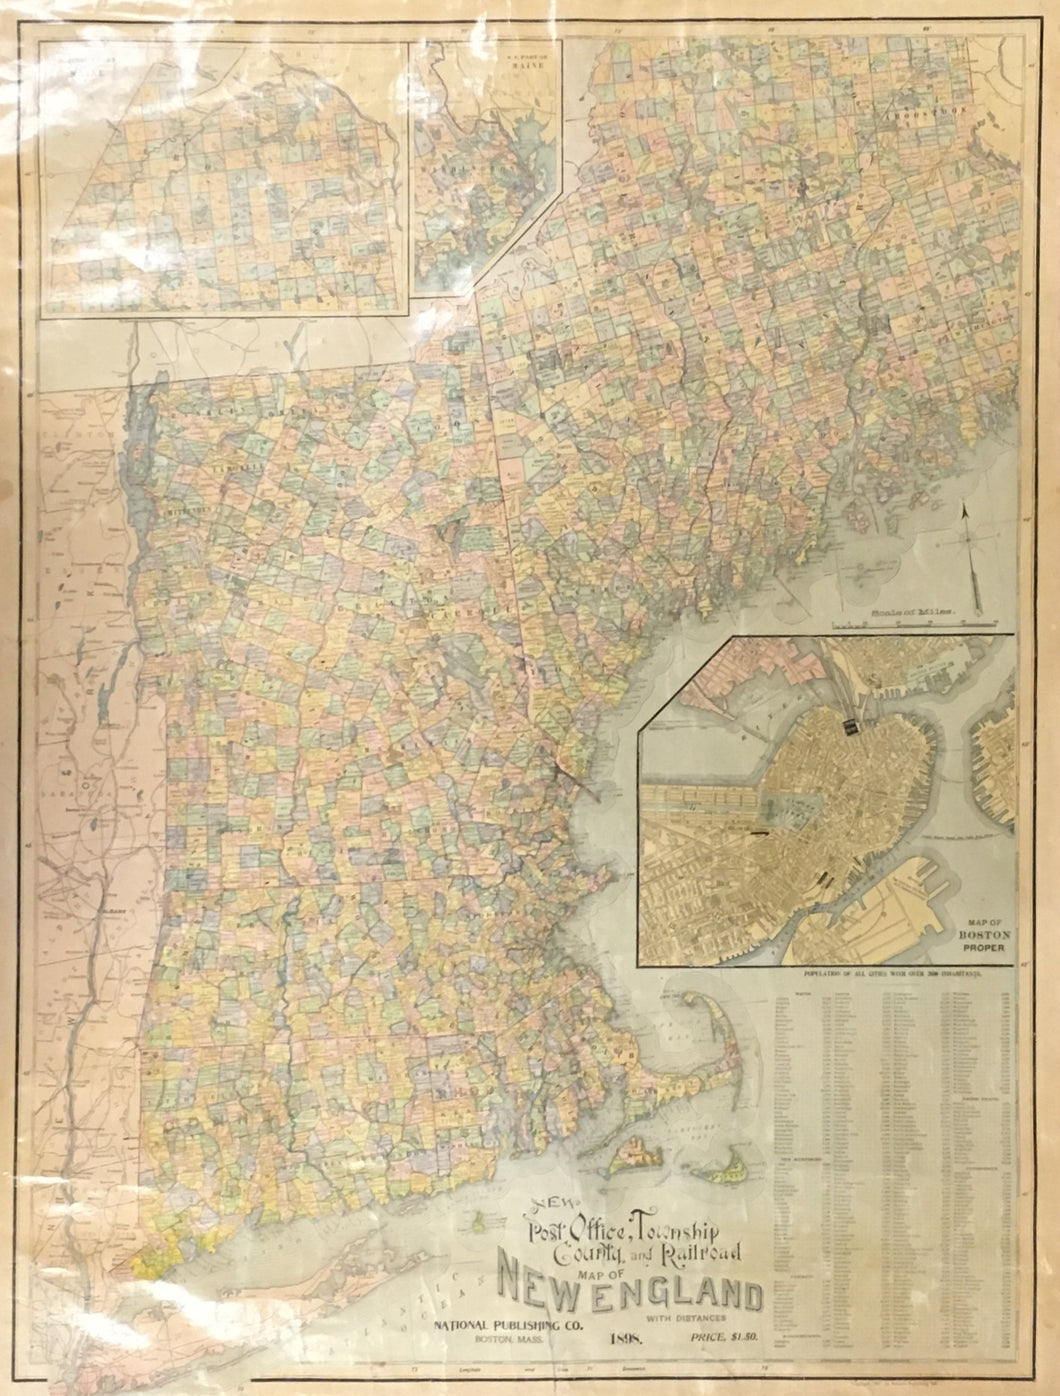 National Publishing Co.  “New Post Office, Township, County and Railroad Map of New England with Distances